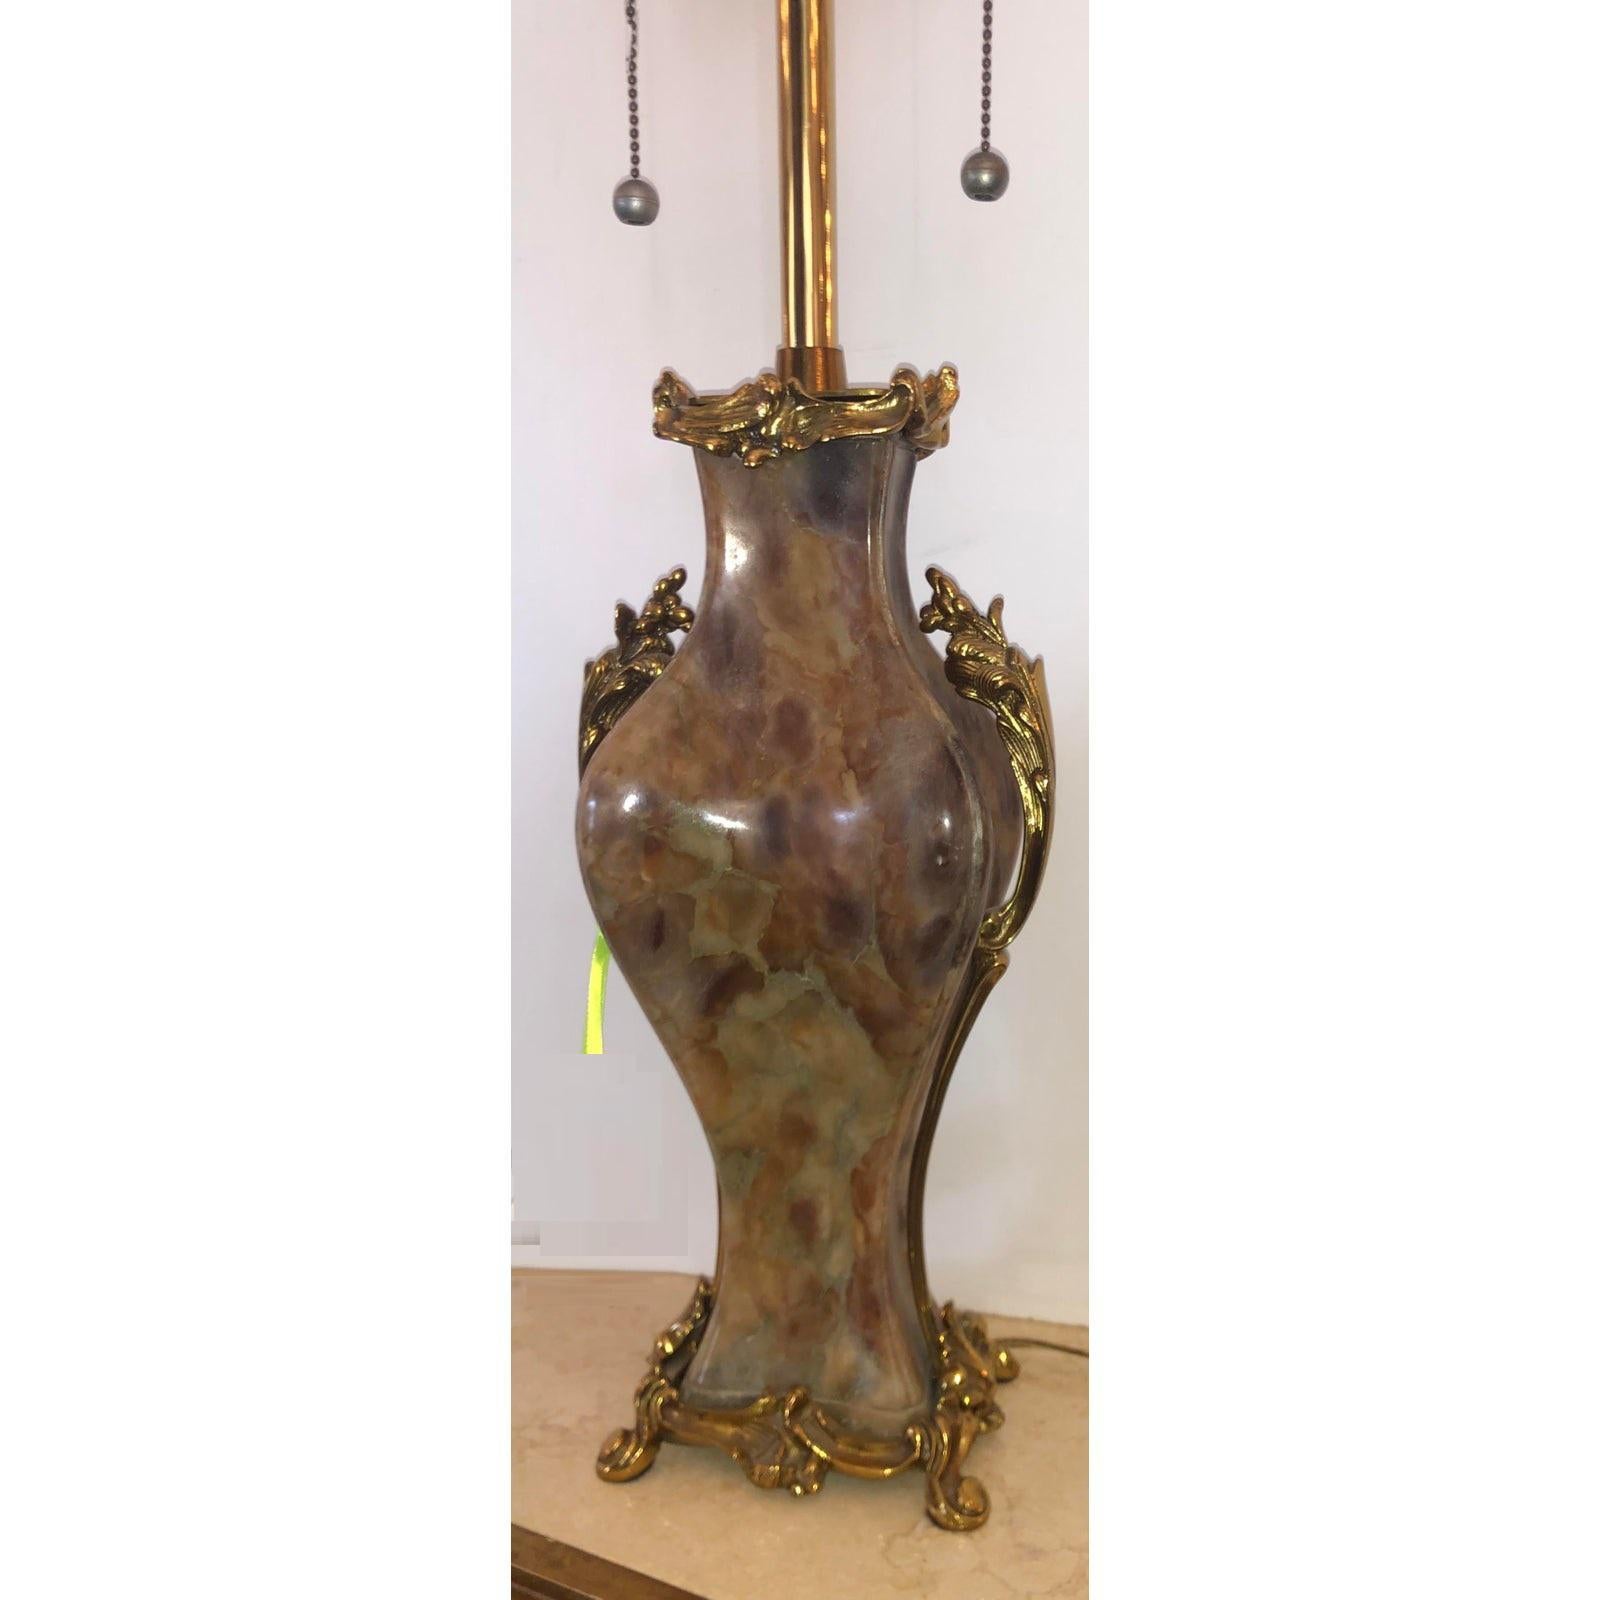 Marbro Exotic Marble & Dore Bronze Table Lamp

Additional information:
Materials: Bronze, Marble
Color: Amber
Brand: The Marbro Lamp Company
Designer: The Marbro Lamp Company
Period: 1950s
Styles: Neoclassical
Item Type: Vintage, Antique or